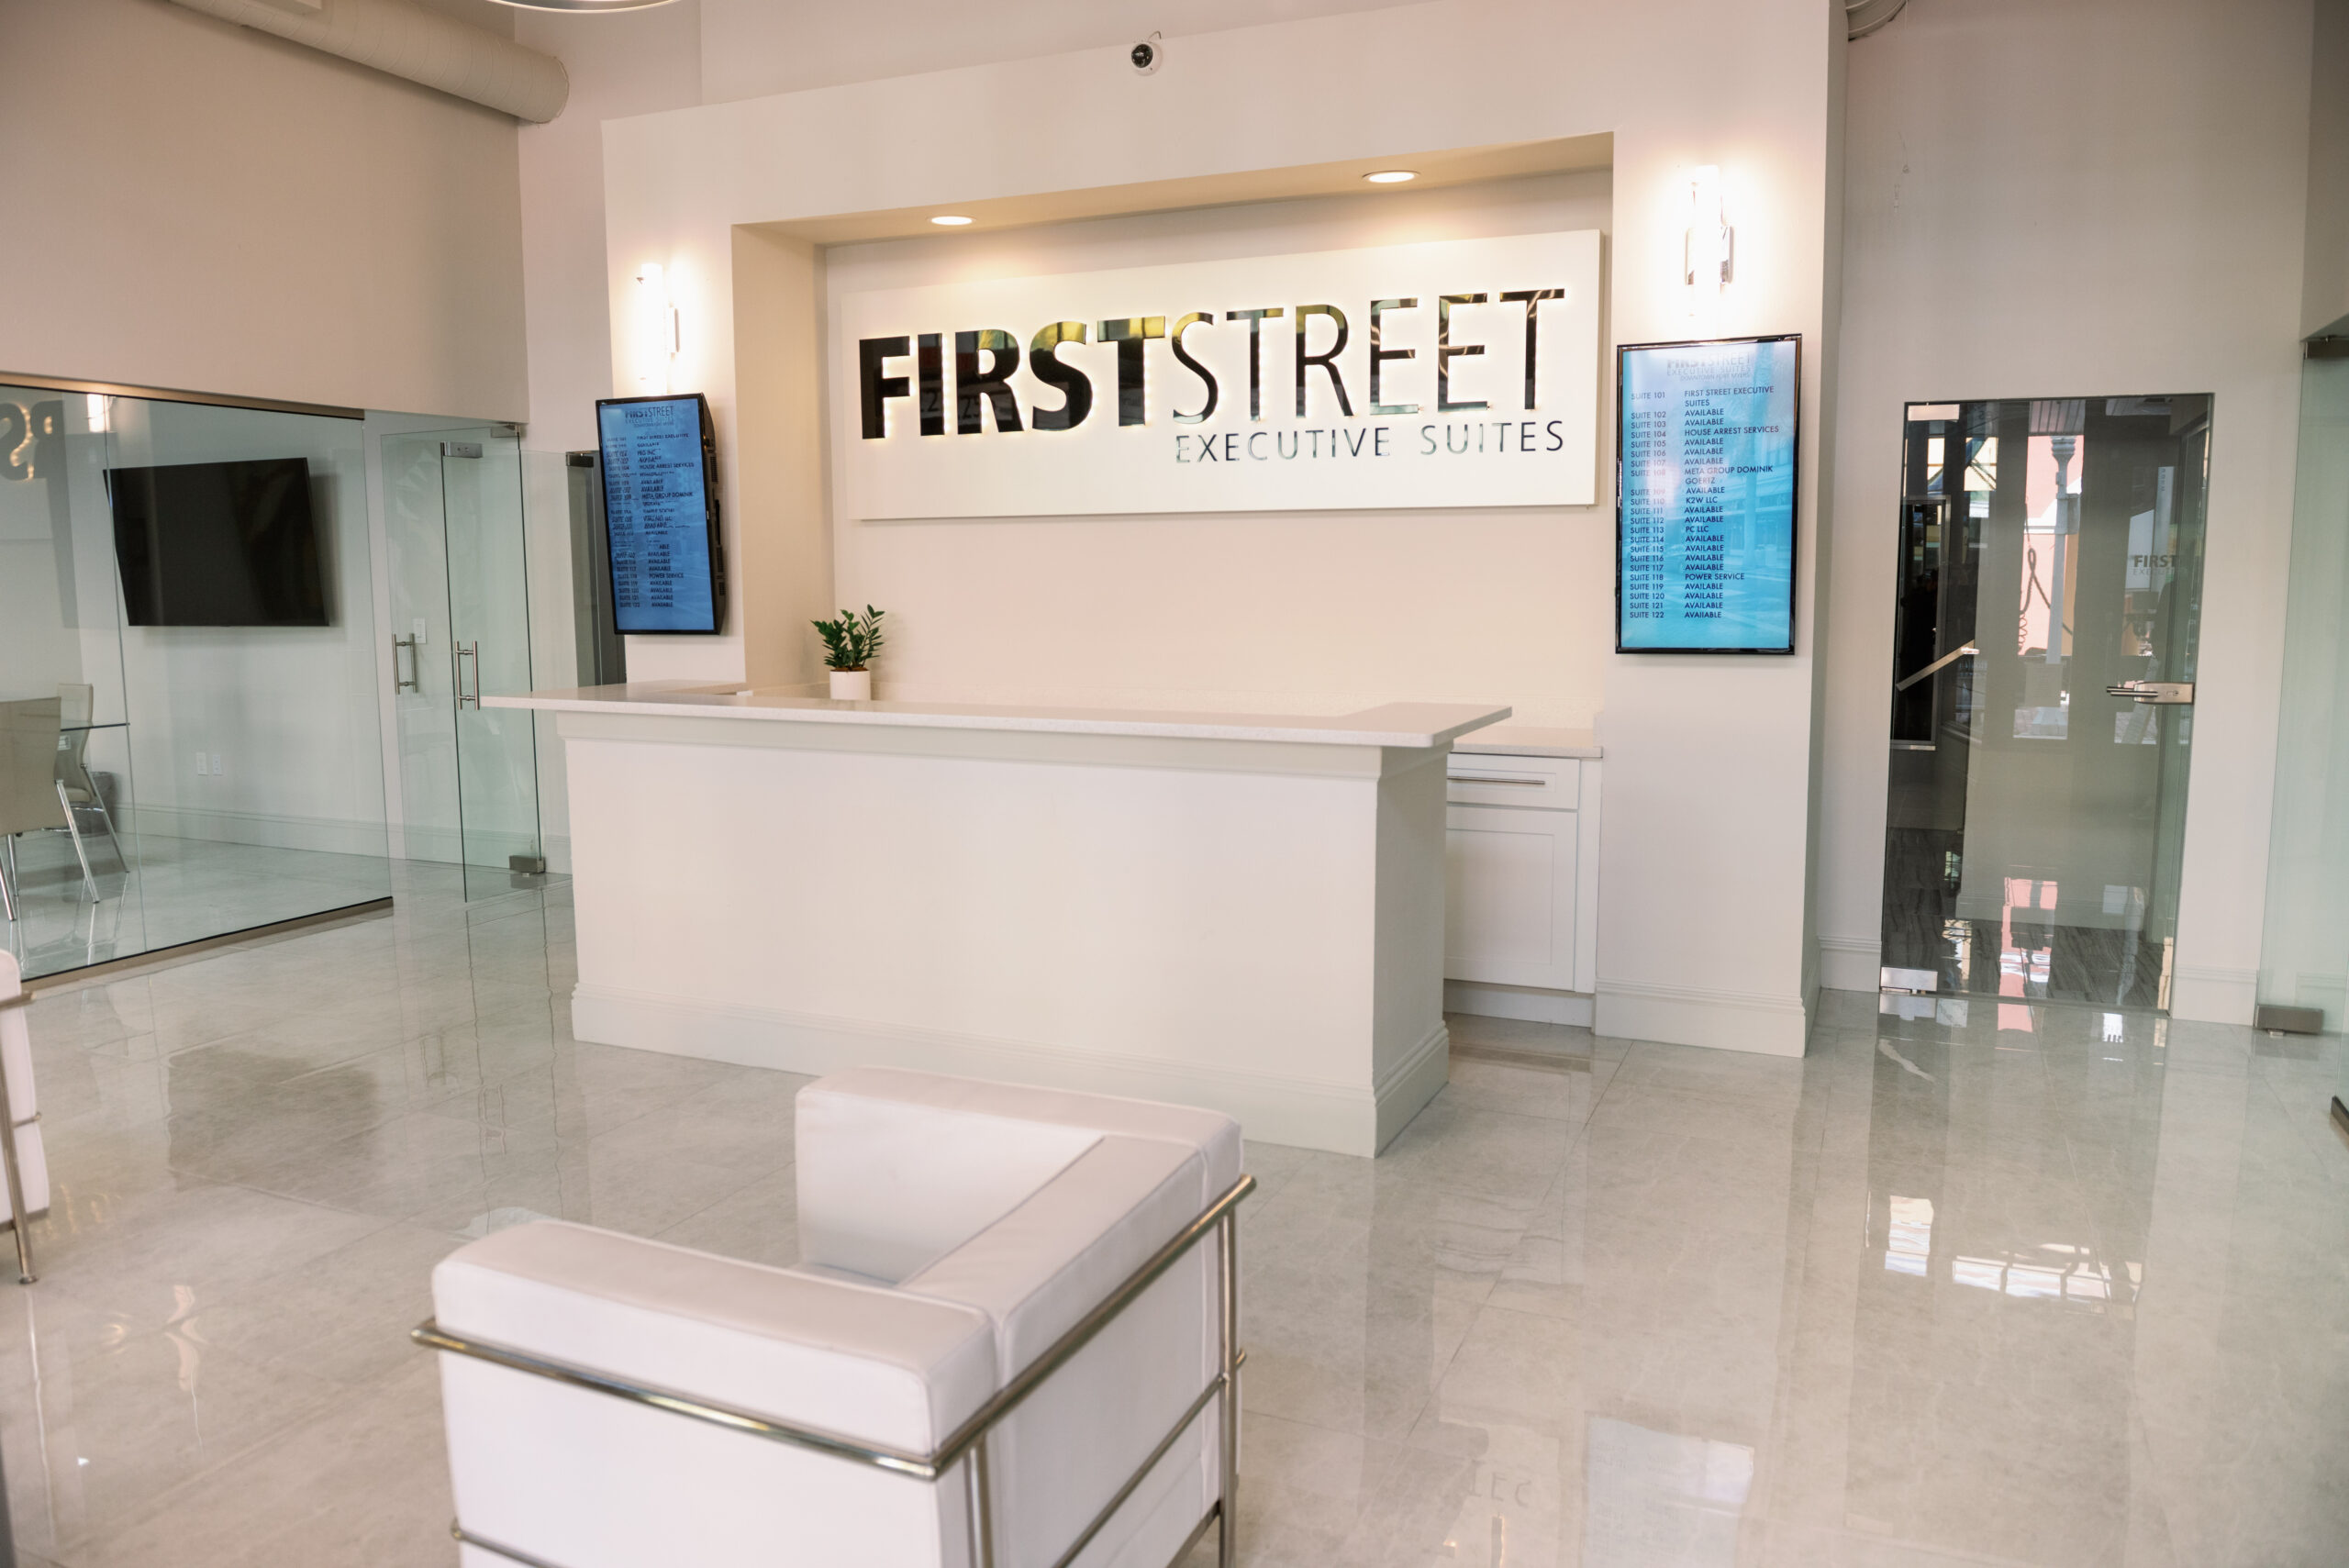 First Street Executive Suites